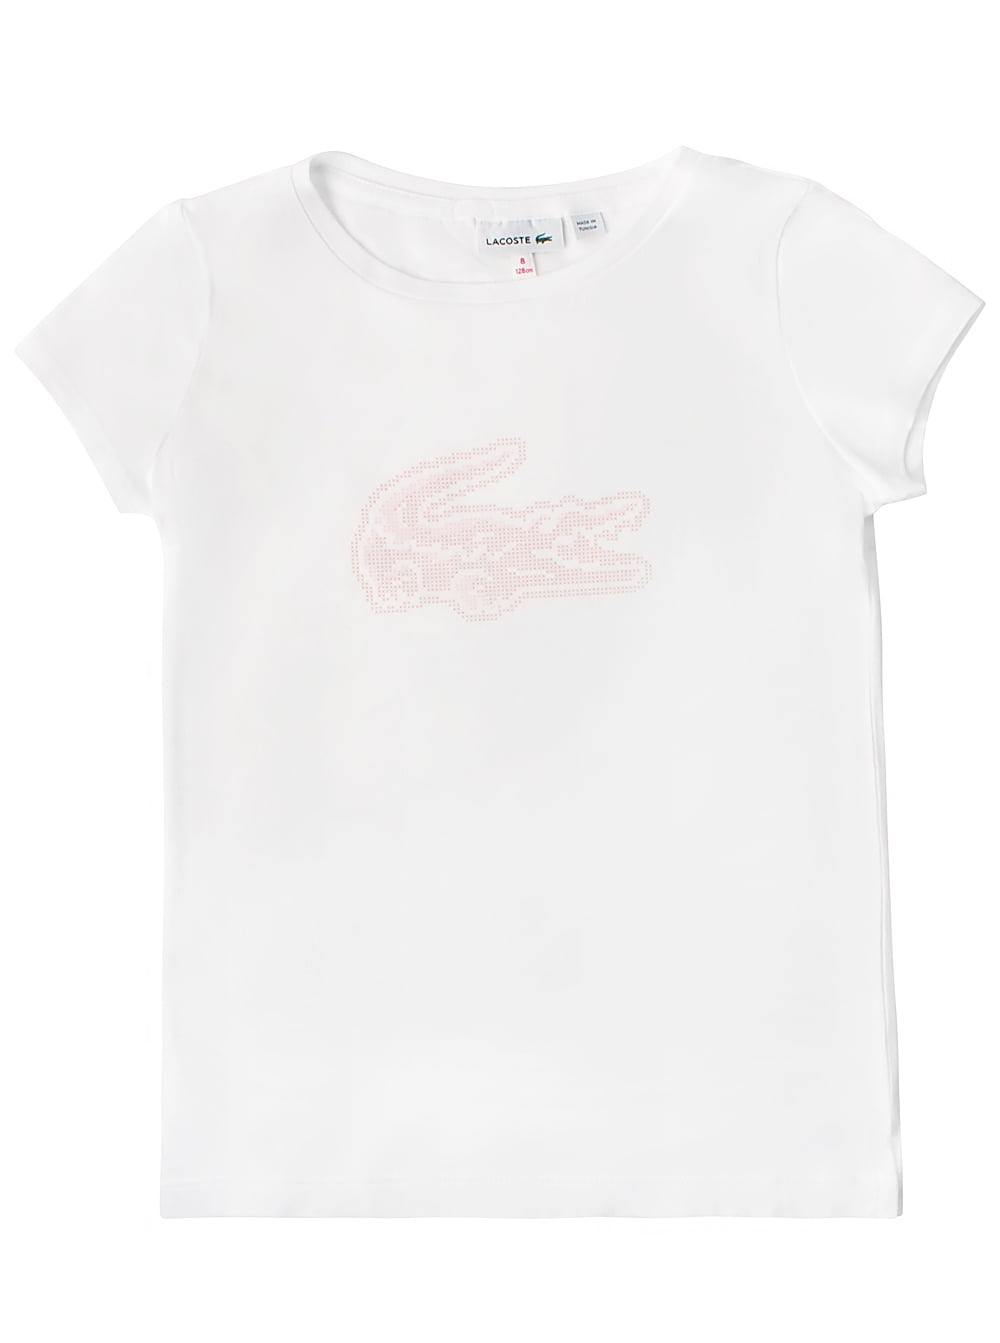 Lacoste Needlepoint Graphic T-Shirt in White